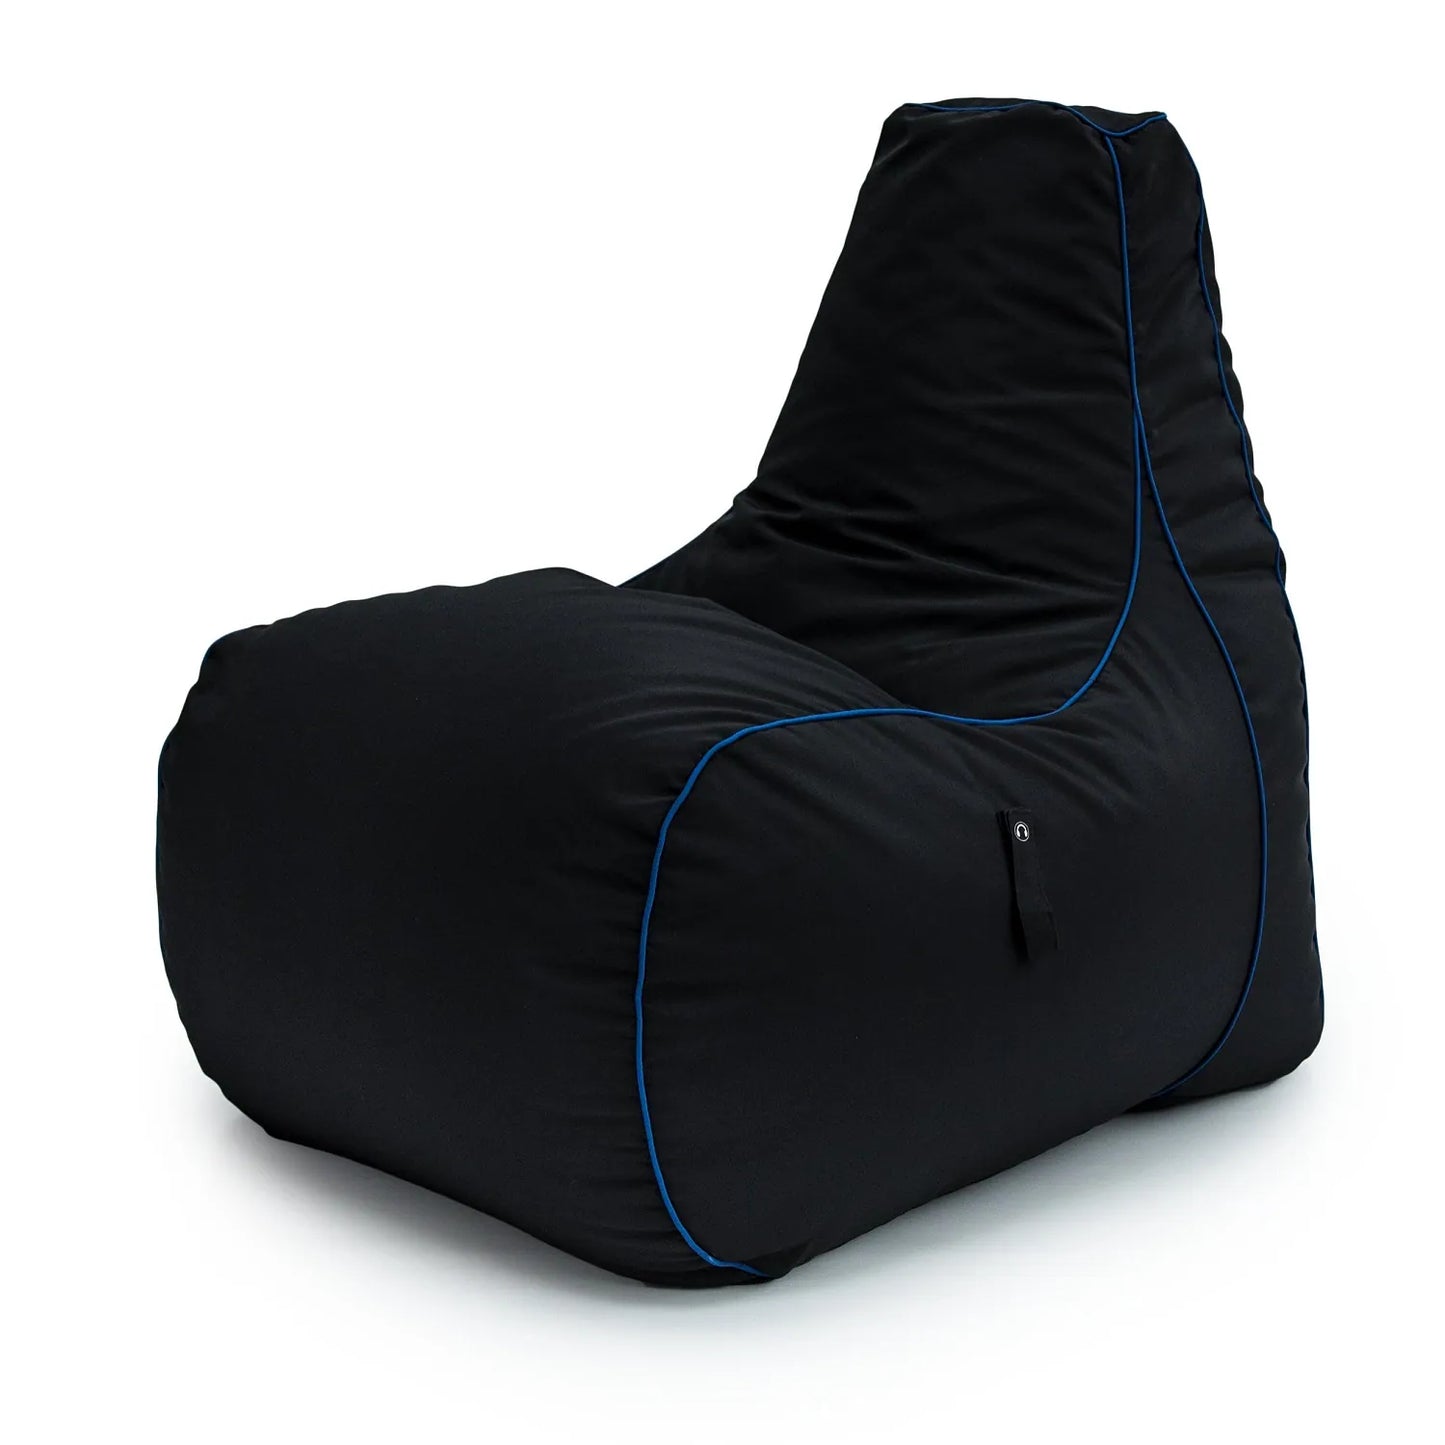 A black bean bag cover with blue trim on a white background.